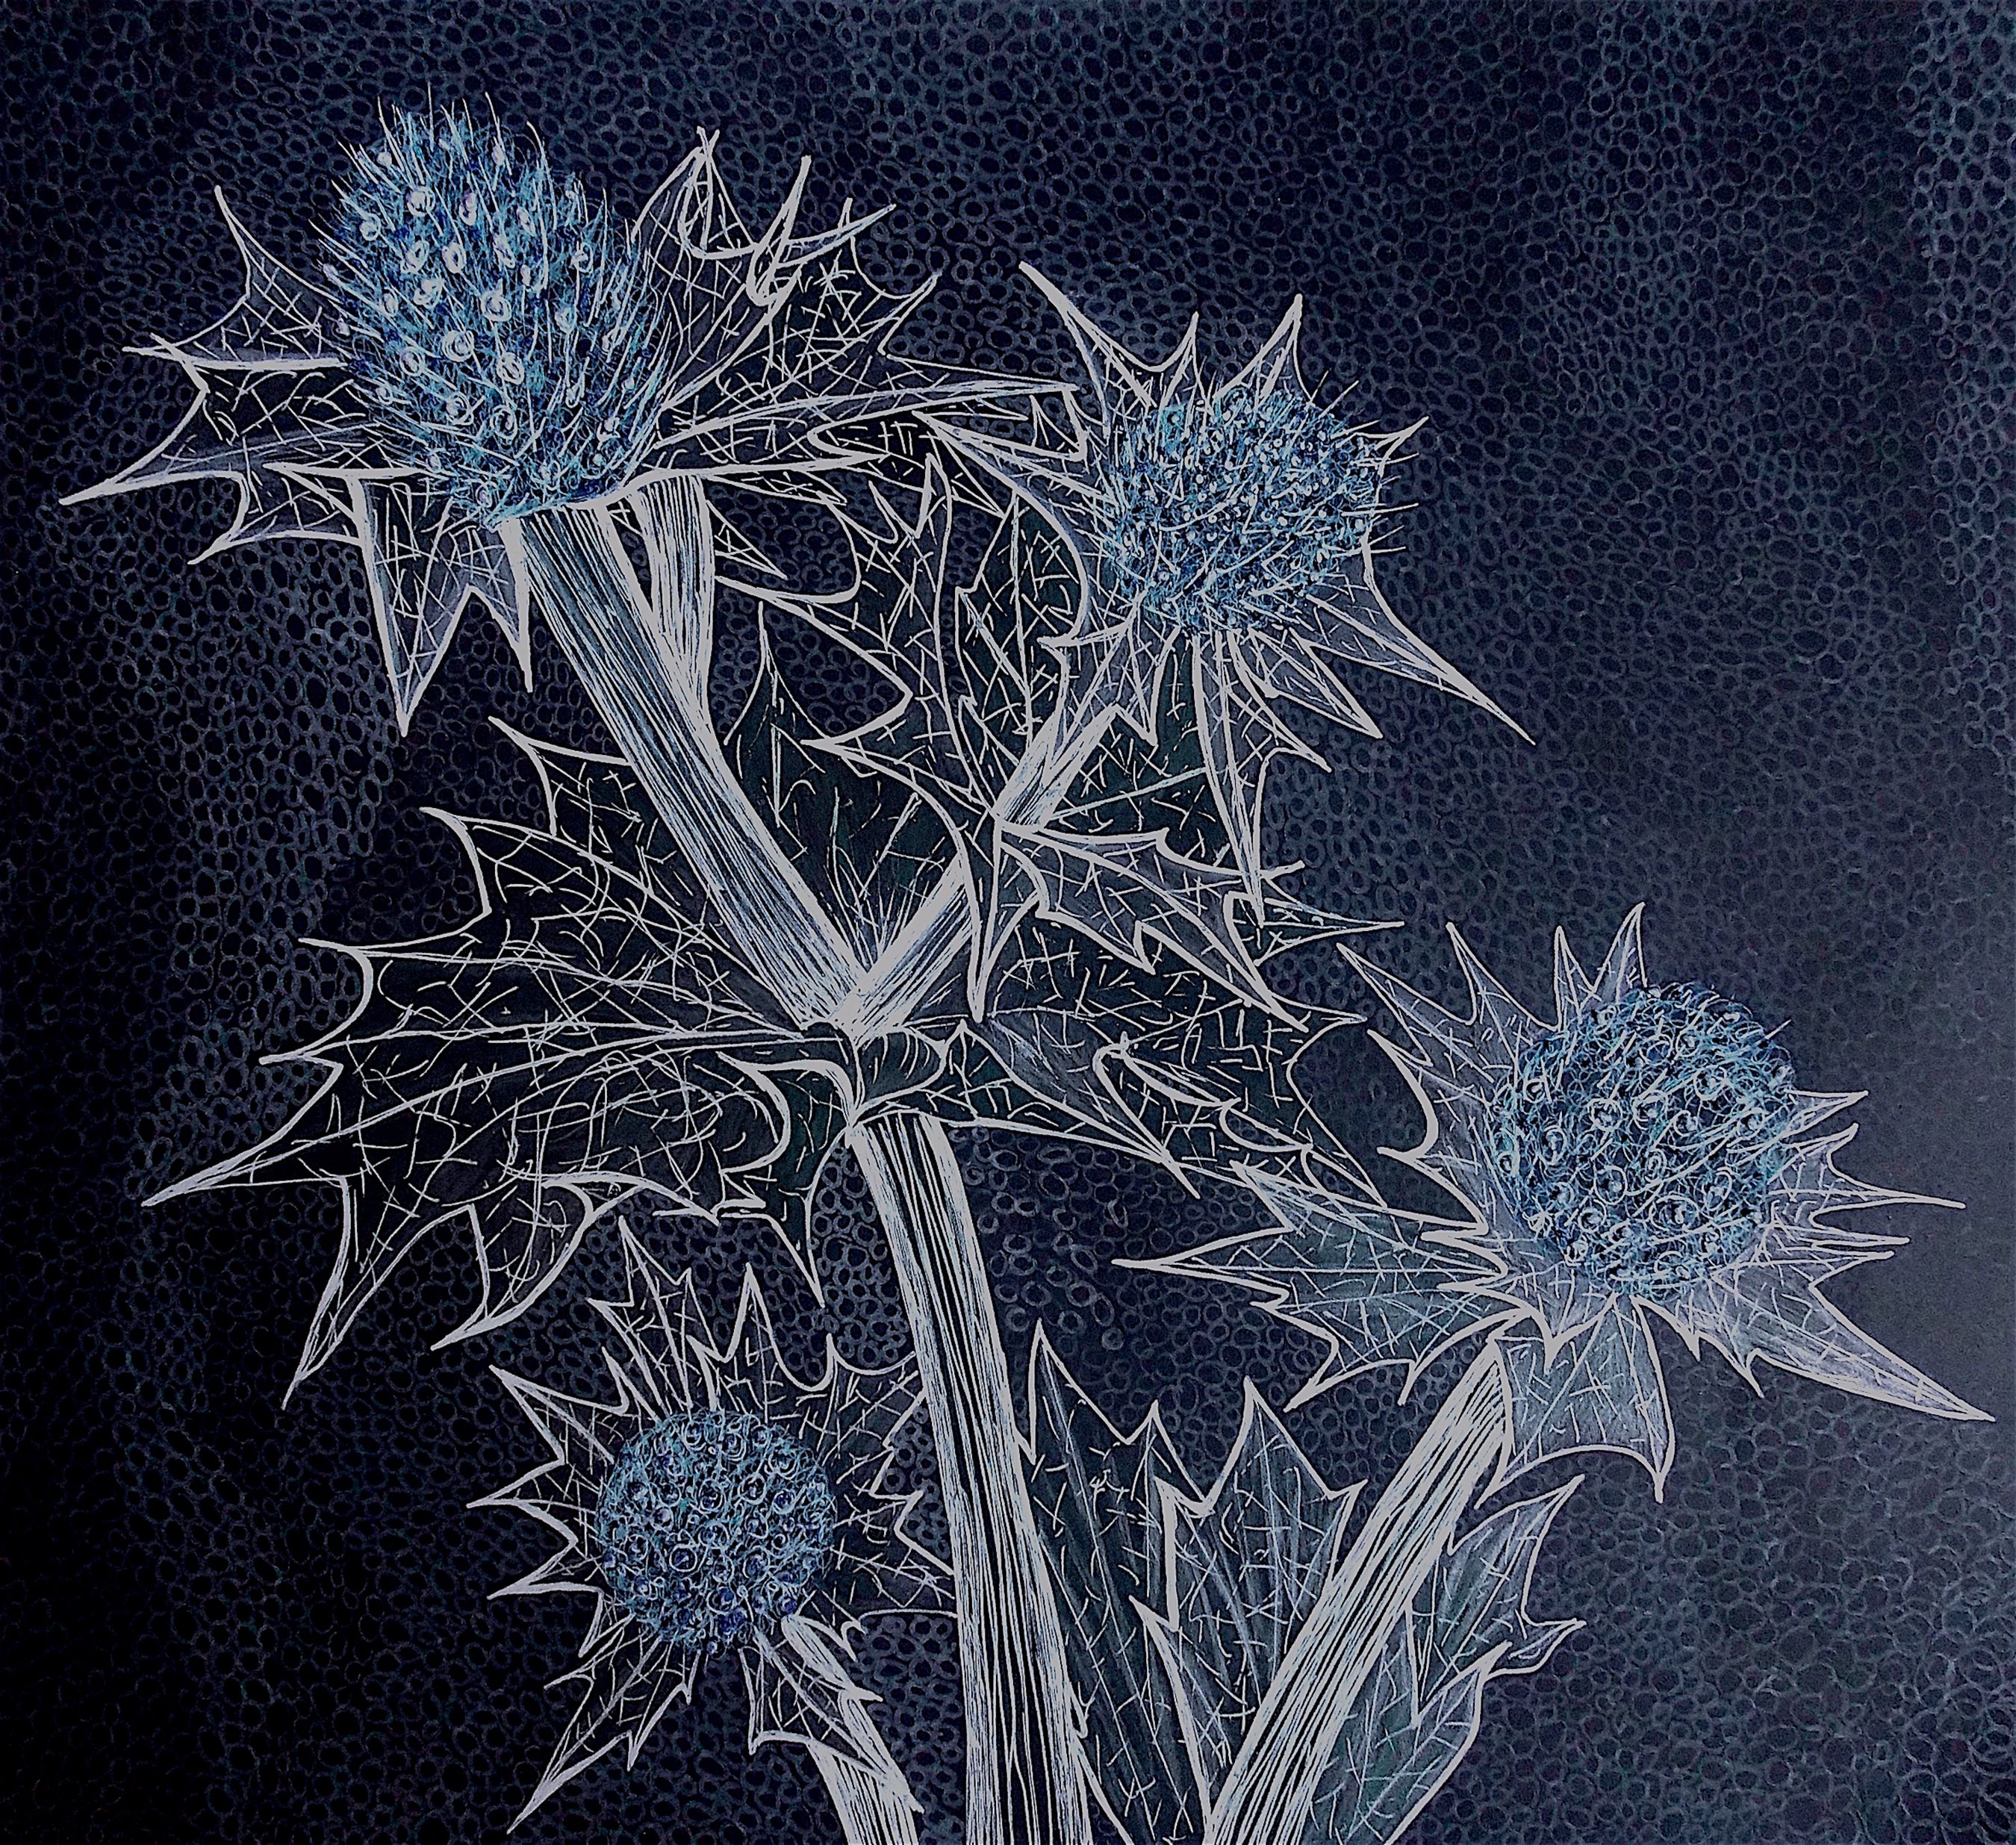 Alison DOyley Exhibition, Norfolk Wildlife Trust Cley Marshes | Naturally Diverse is an exhibition by local artist Alison D'Oyley | Exhibition, artist,wildlife, landscapes, environmental change